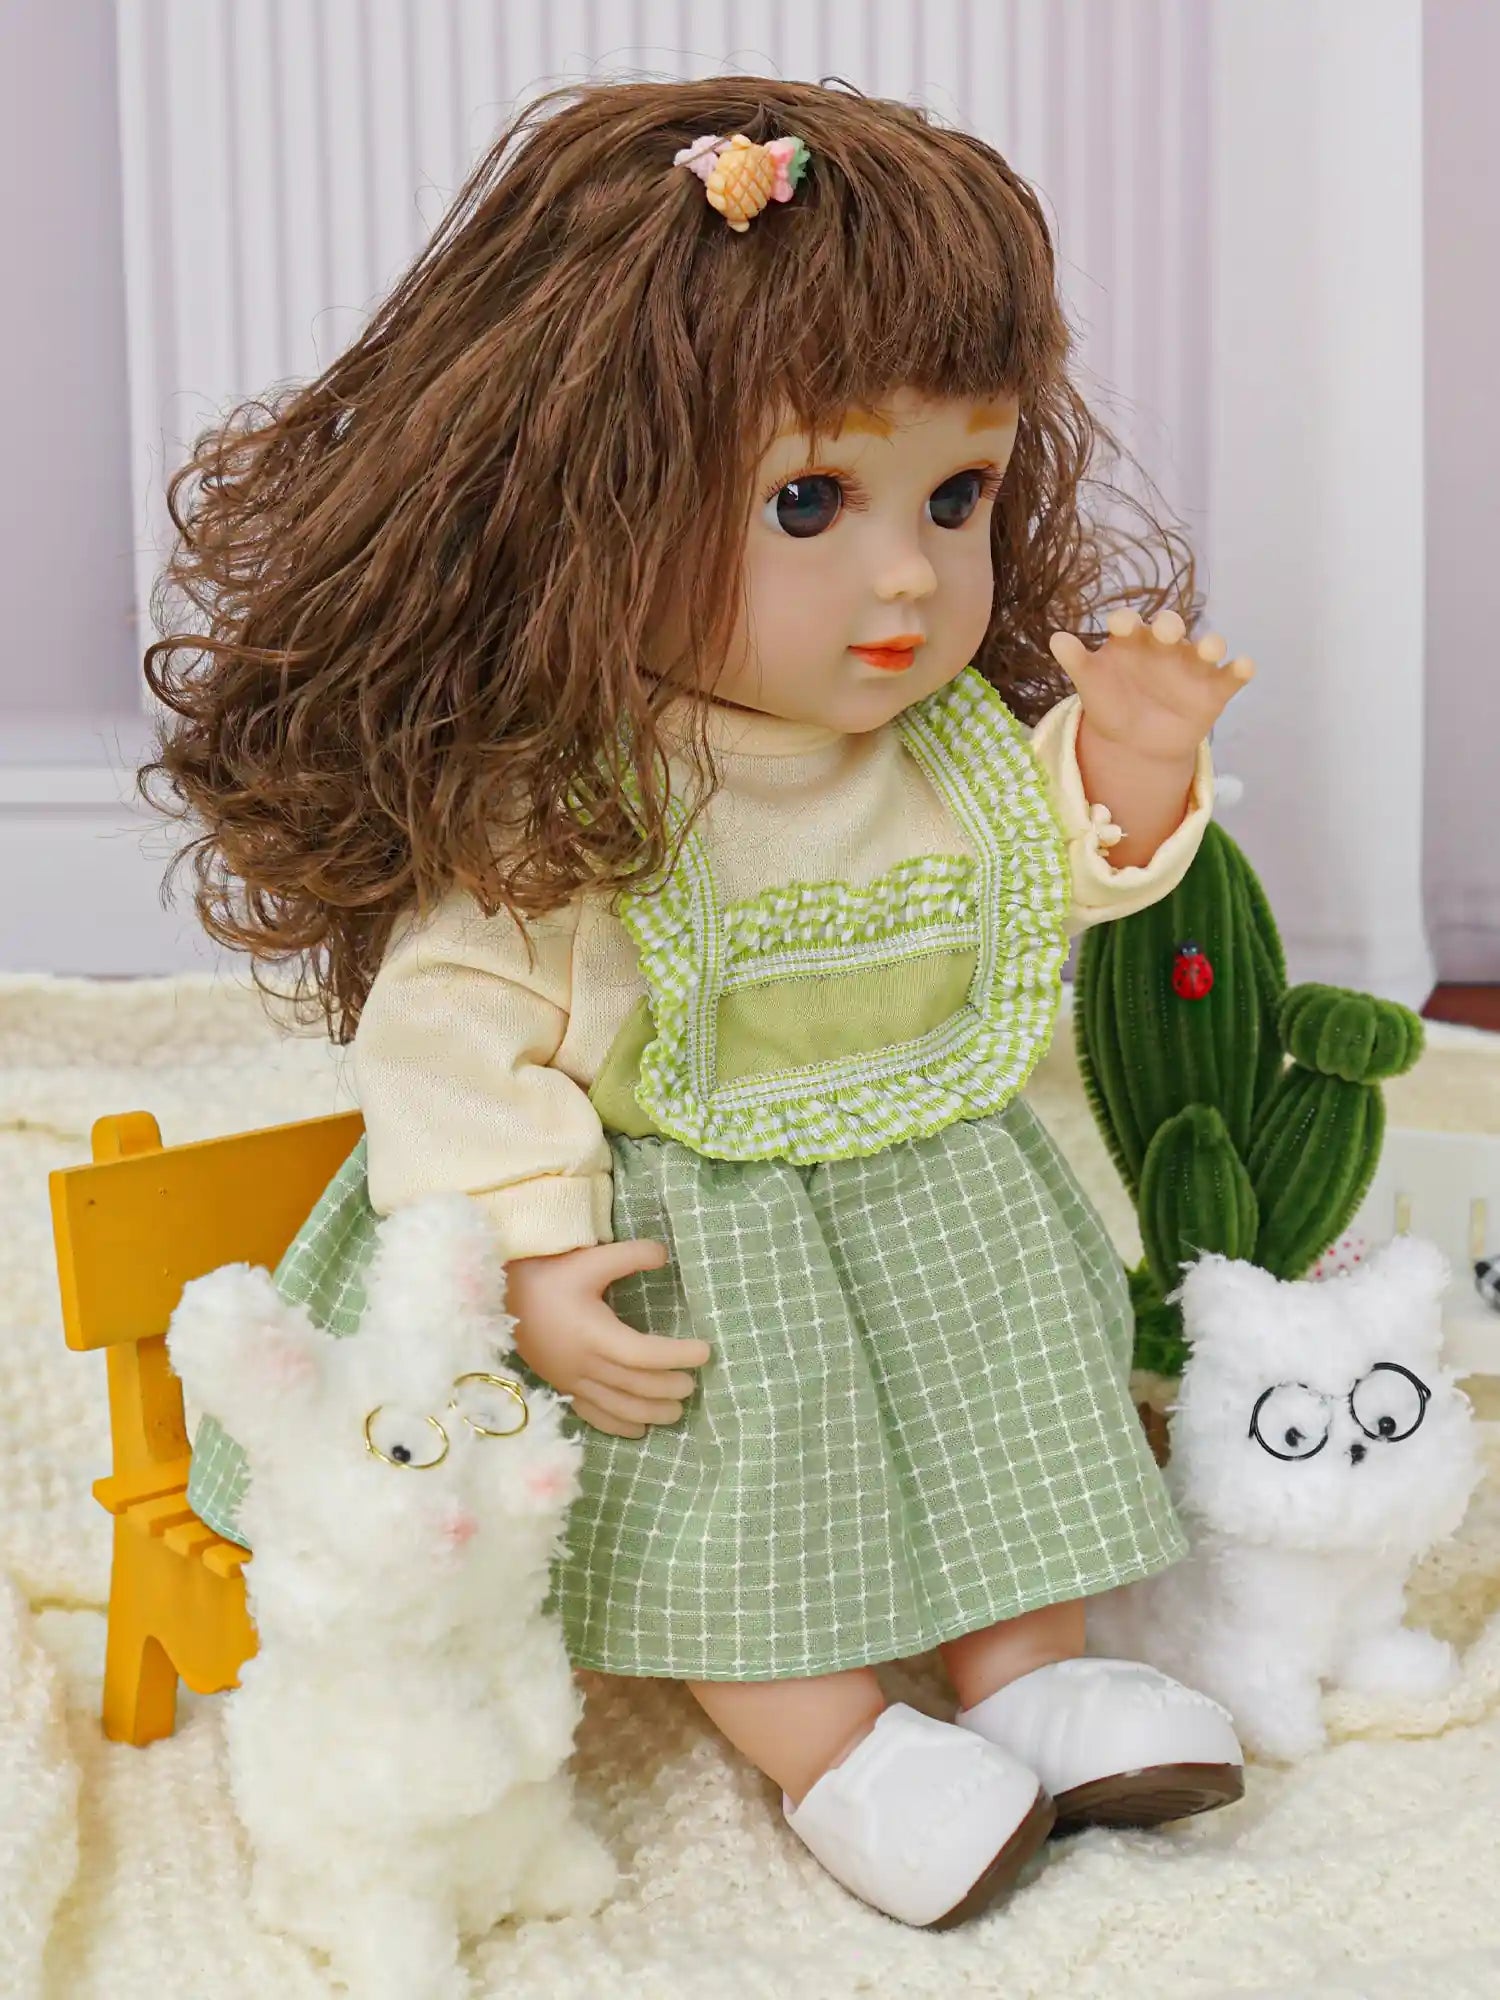 Childlike doll with a friendly expression, in a green jumper and white shoes, with toy dogs.